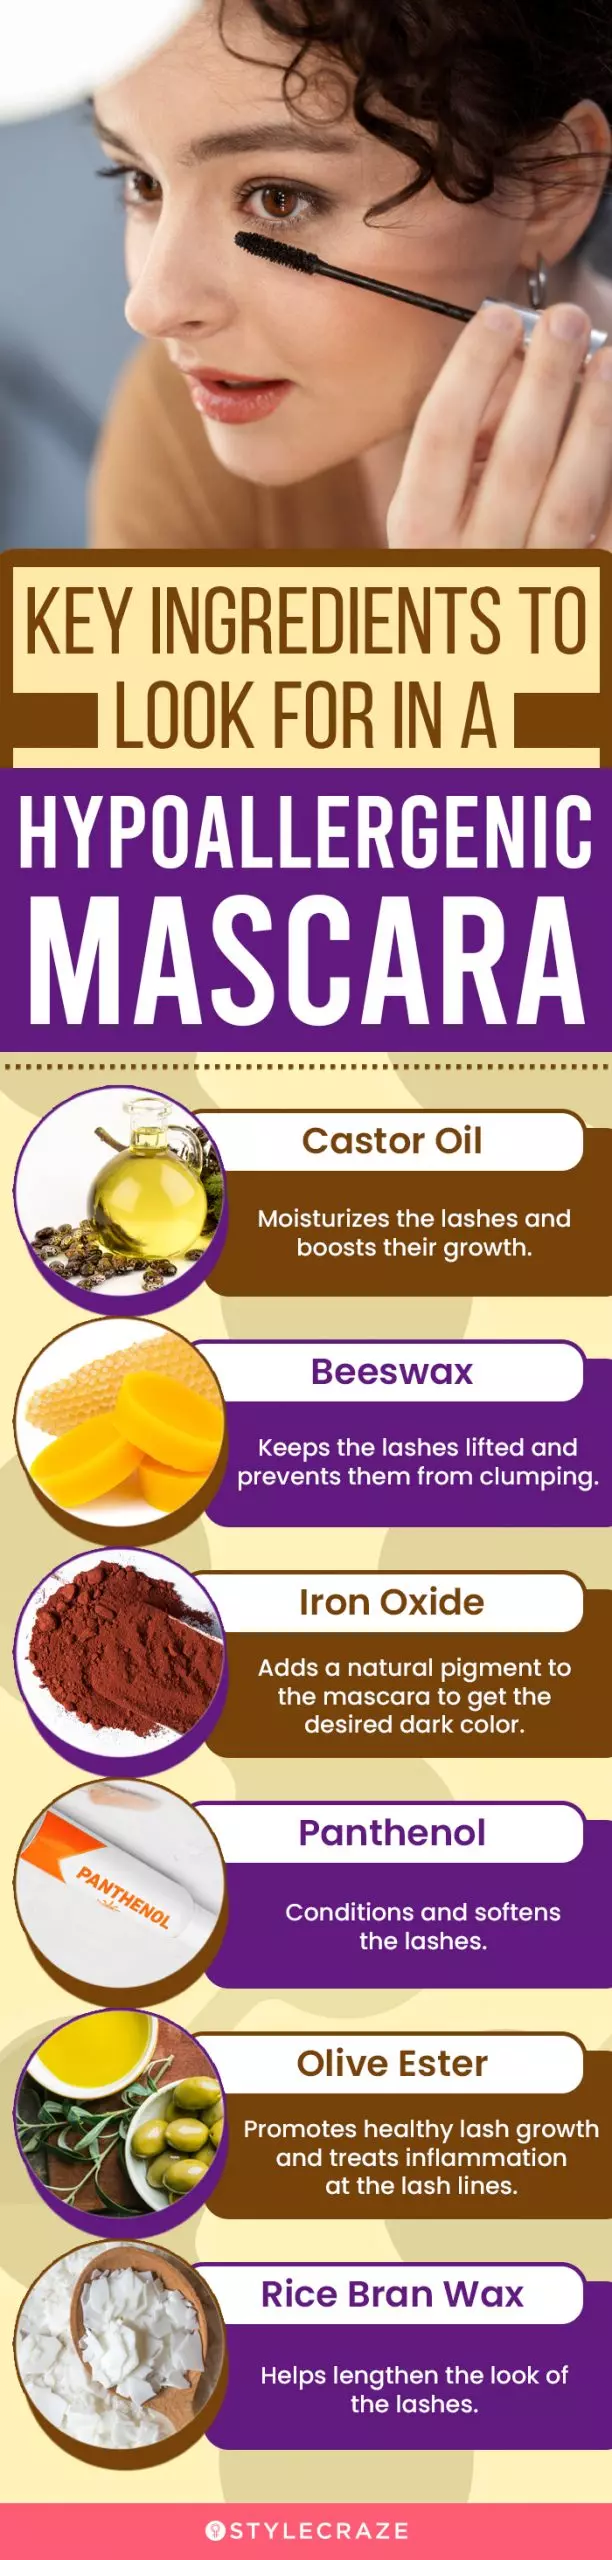 Key Ingredients To Look For In A Hypoallergenic Mascara (infographic)